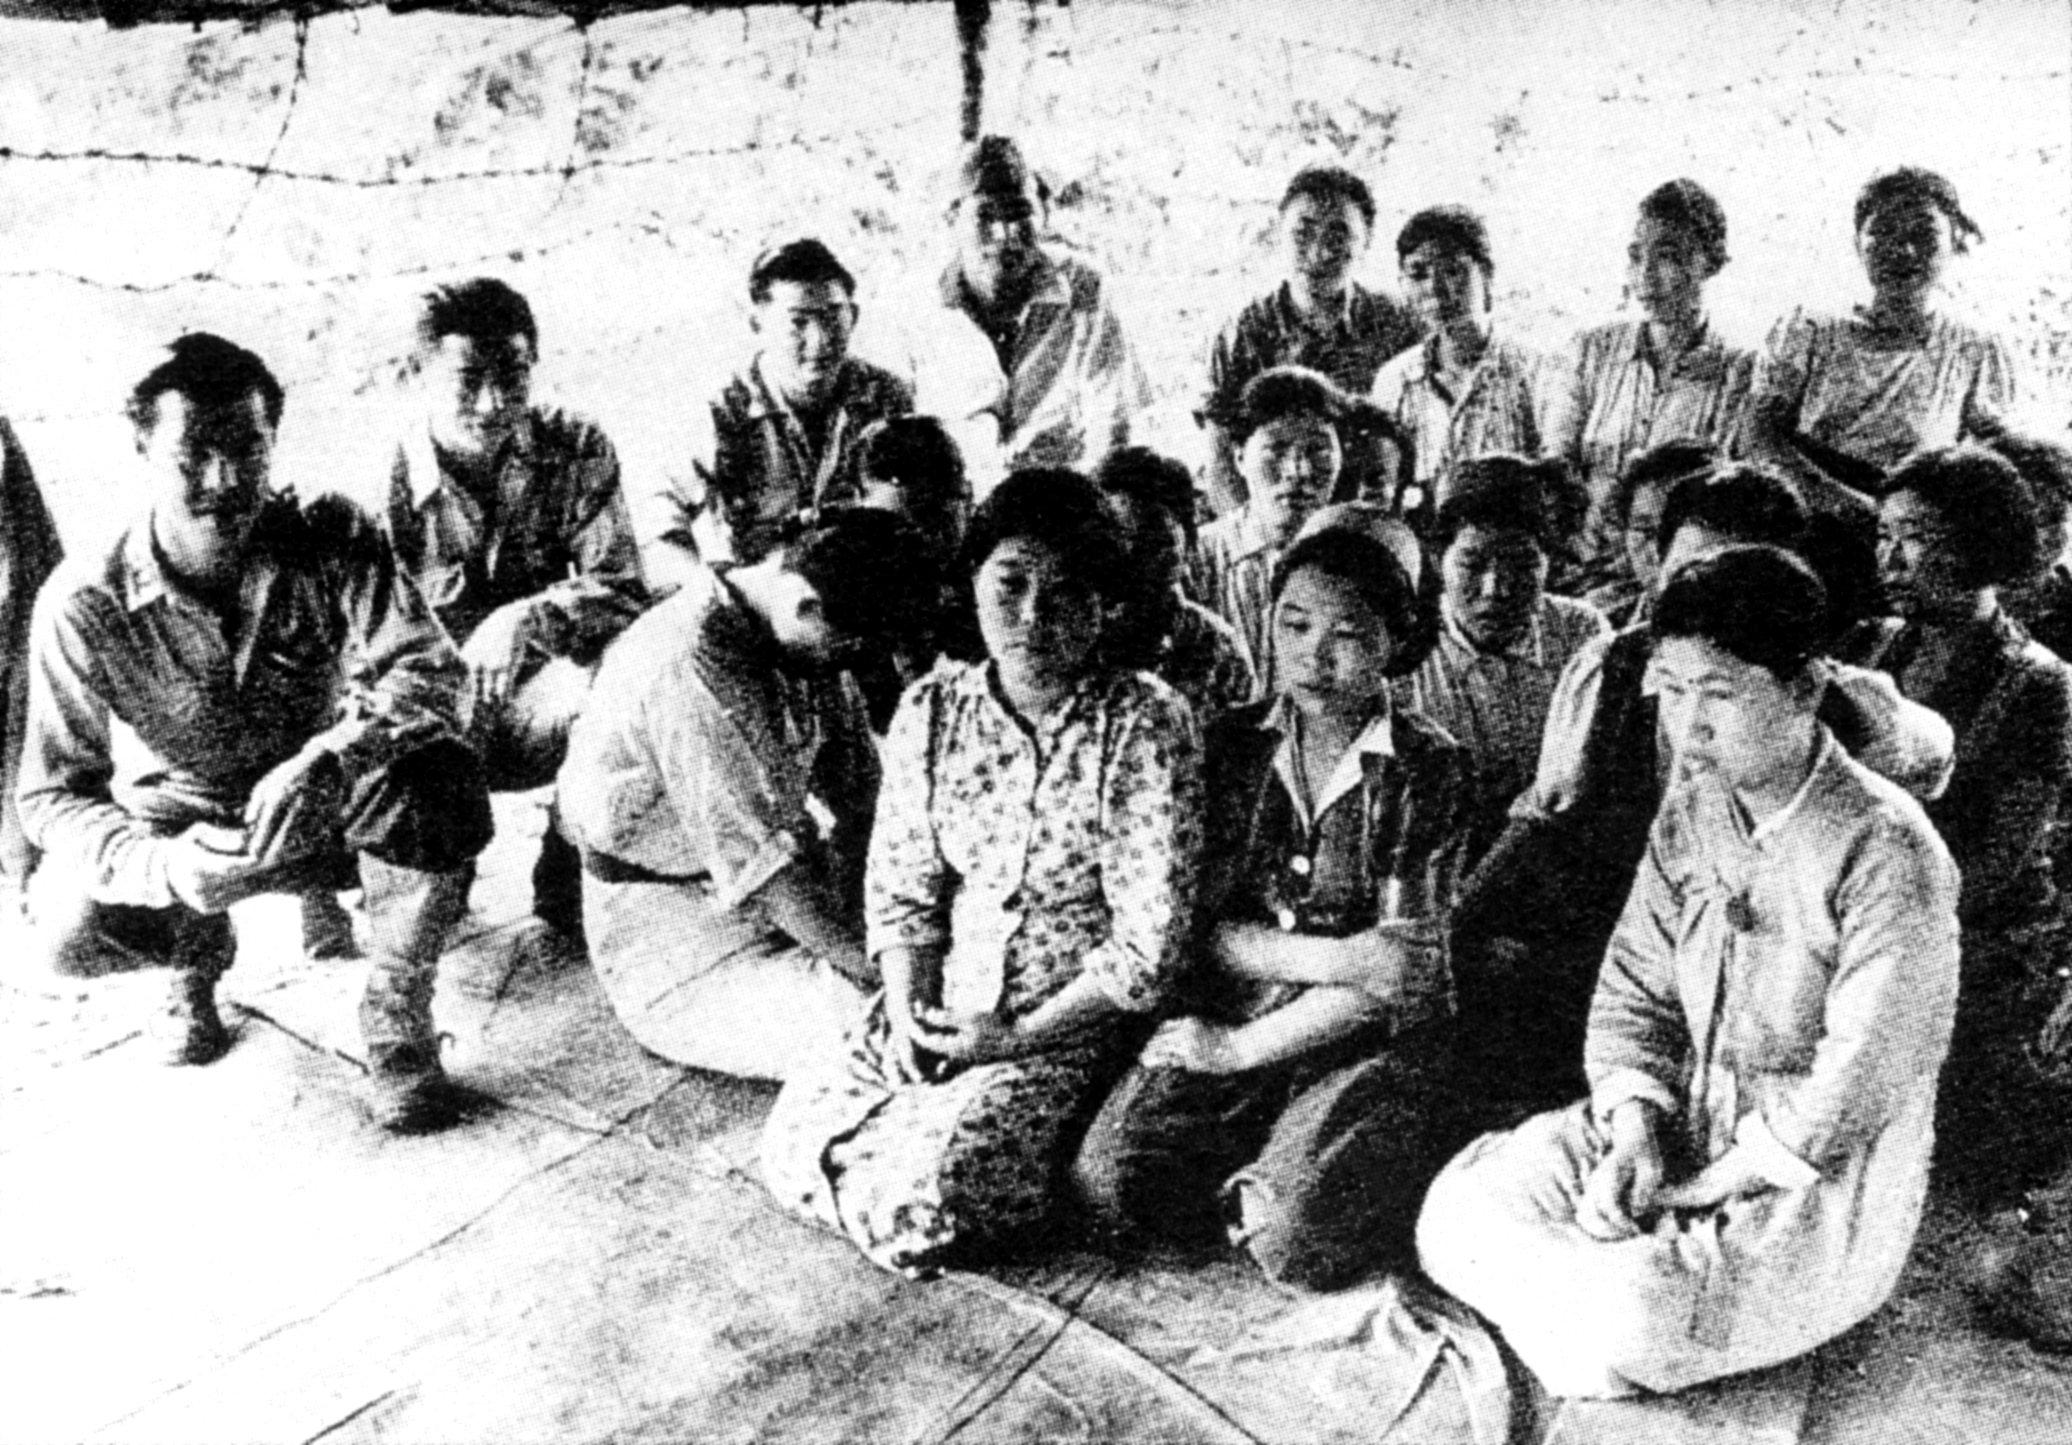 About 200,000 women from China, Korea, the Philippines and elsewhere in Asia were forced to work as sex slaves in Japanese military brothels in the 1930s and 1940s. Photo: SCMP